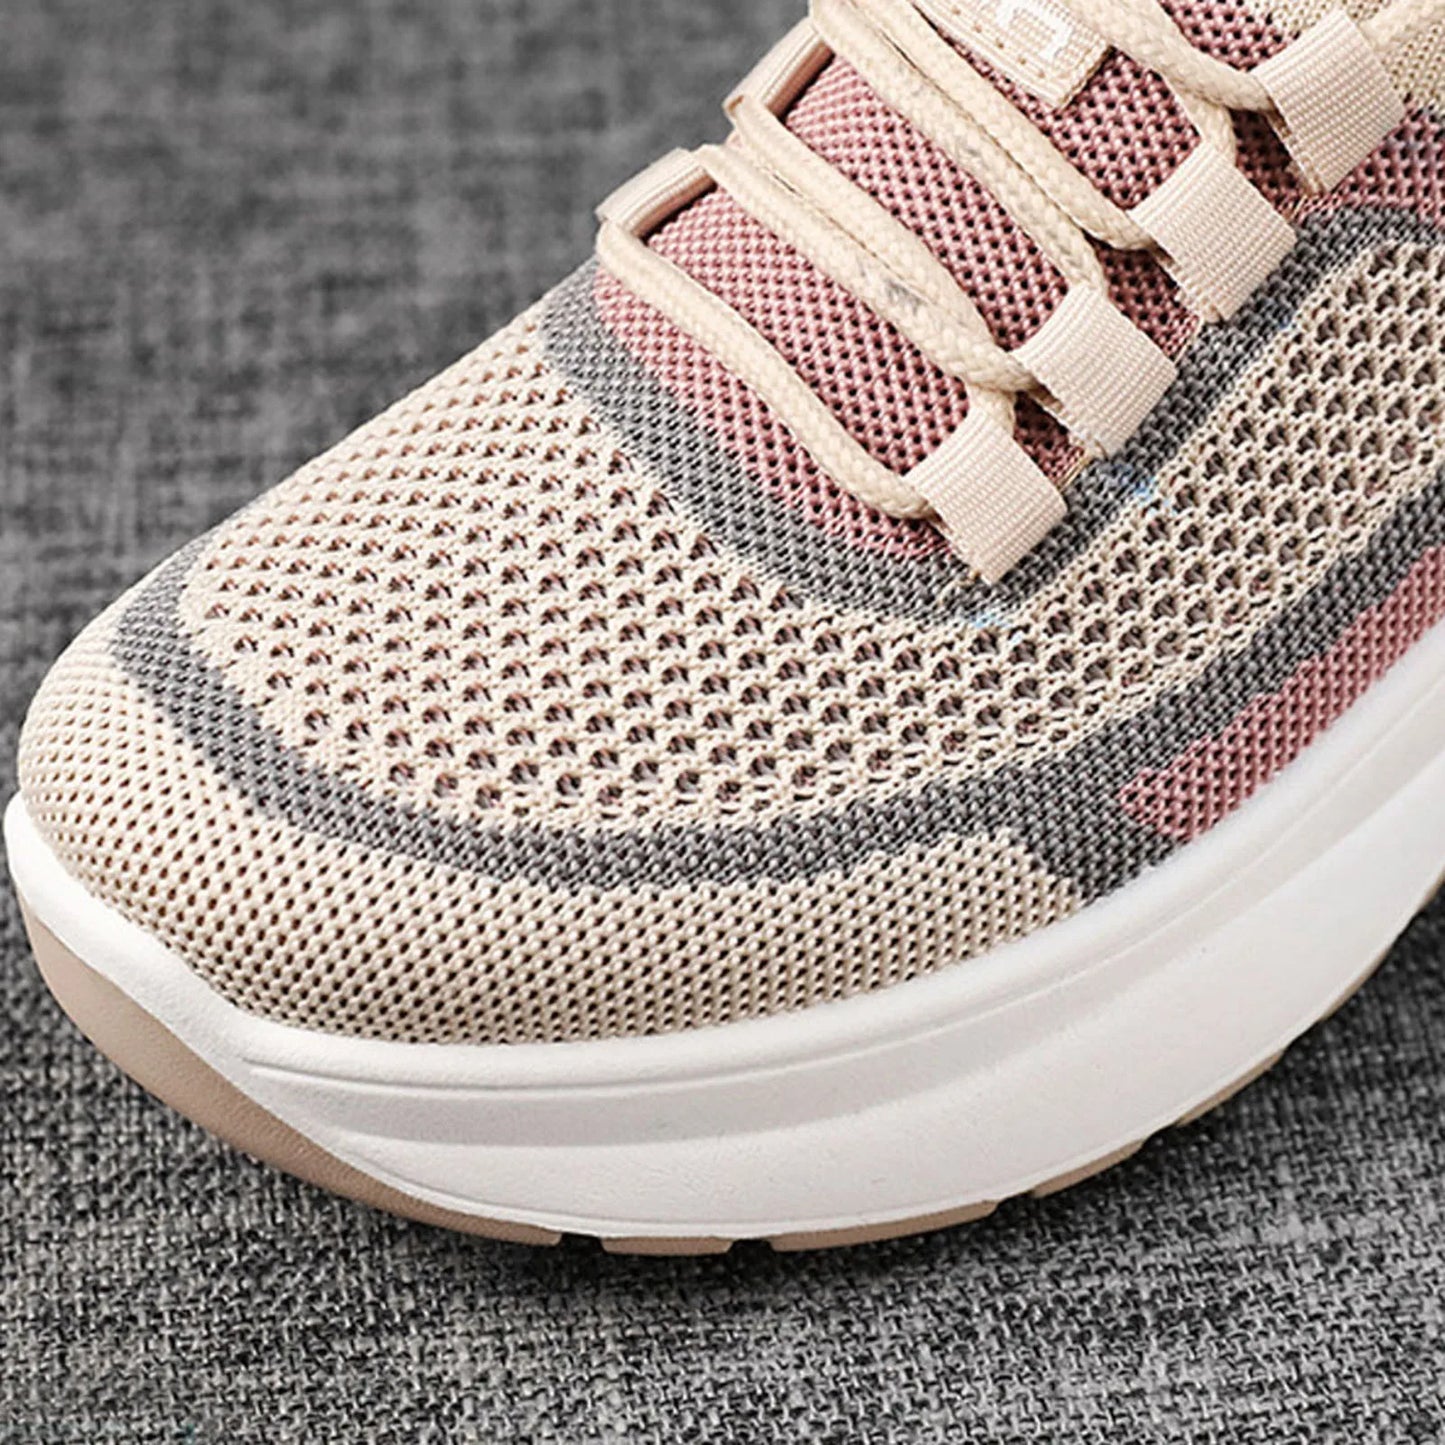 Women Casual Knitting Shoes Fashion Lace Up Flat Bottom/Comfortable Casual Sneakers Slip-On Round Toe